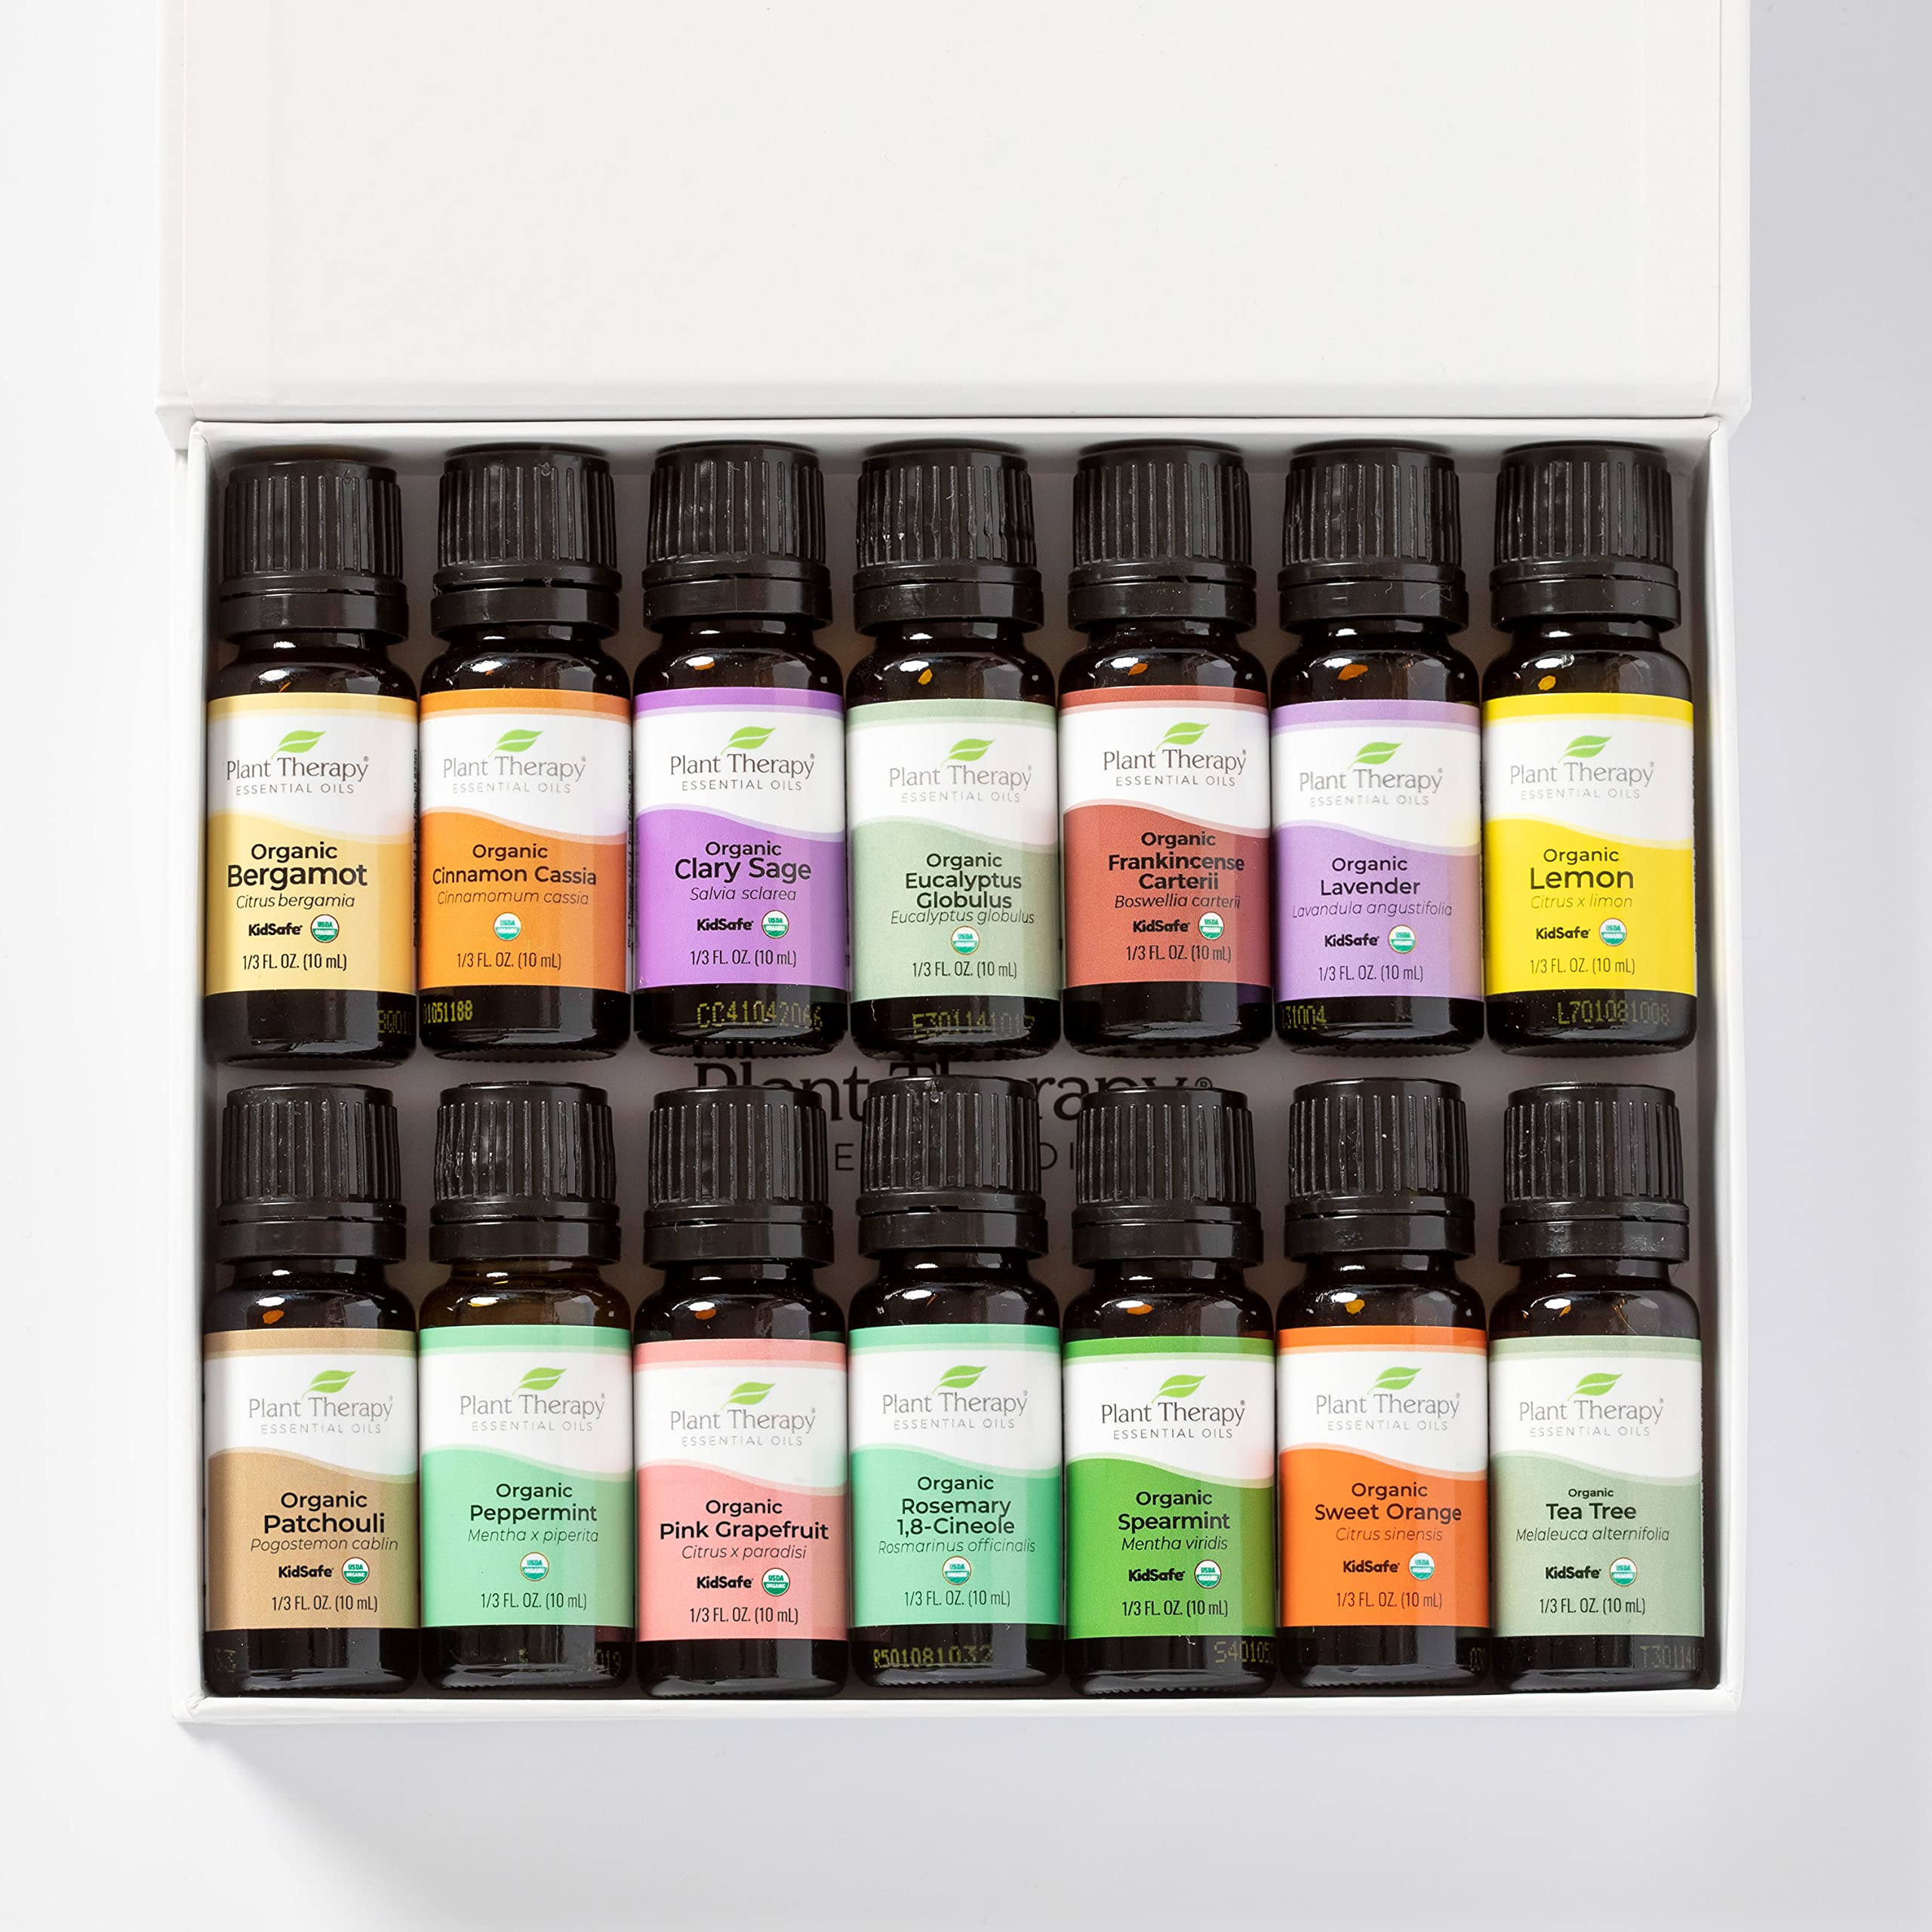 Plant Therapy Top 14 Organic Essential Oil Singles Set 100% Pure Essential Oils, Undiluted, Natural Aromatherapy for Diffusion and Body Care 10 mL (1/3 oz) Each